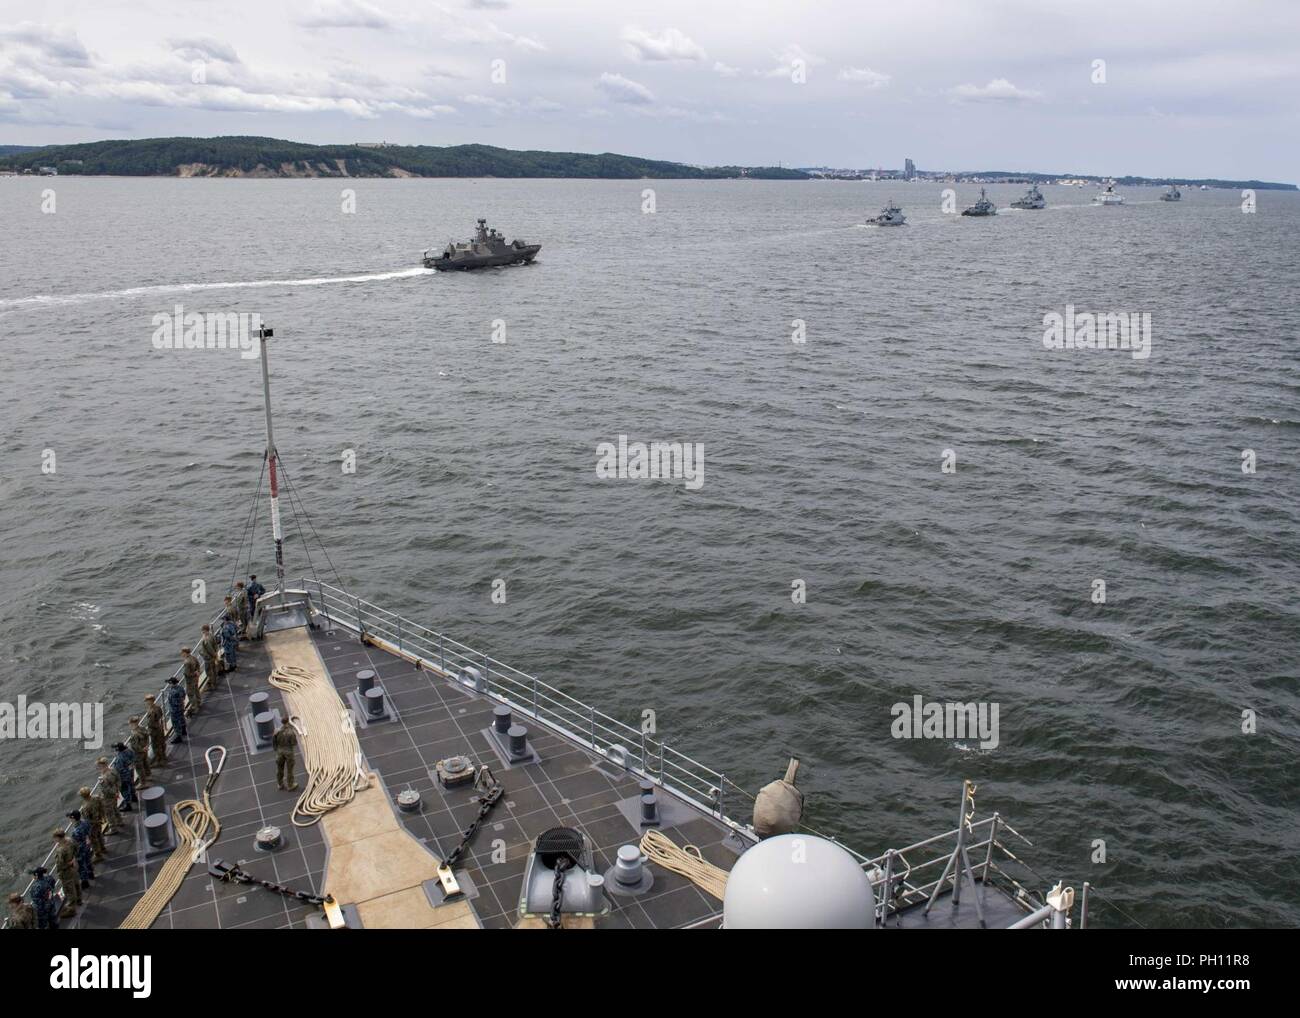 Poland (June 24, 2018) The Harpers Ferry-class dock landing ship USS Oak Hill (LSD 51) participates in a parade of ships in honor of Poland's 100-year naval anniversary, in Gdynia, Poland, June 24, 2018. Oak Hill, homeported in Virginia Beach, Virginia, is conducting naval operations in the U.S. 6th Fleet area of operations. Stock Photo